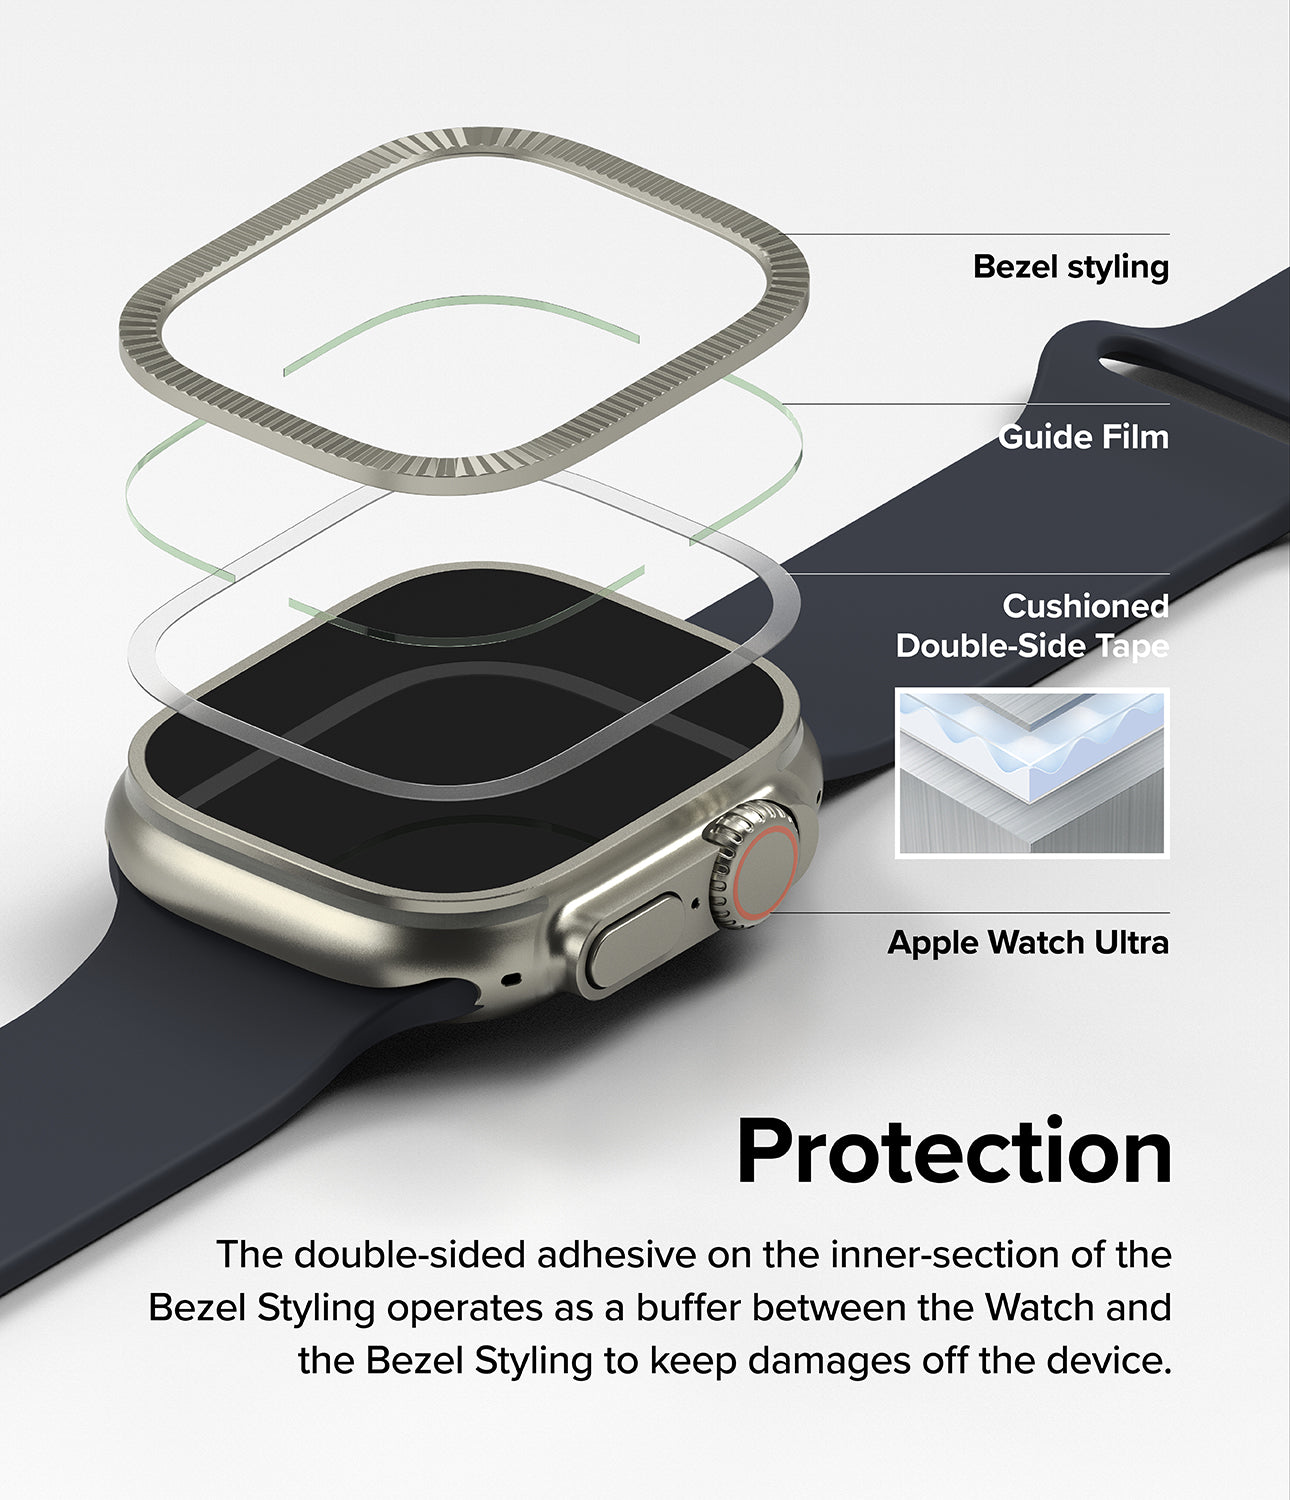 Apple Watch Ultra 2 / 1 | Glass + Bezel Styling 49-44 (ST) - Protection. The double-sided adhesive on the inner-section of the Bezel Styling operates as a buffer between the Watch and the Bezel Styling to keep damages off the device.